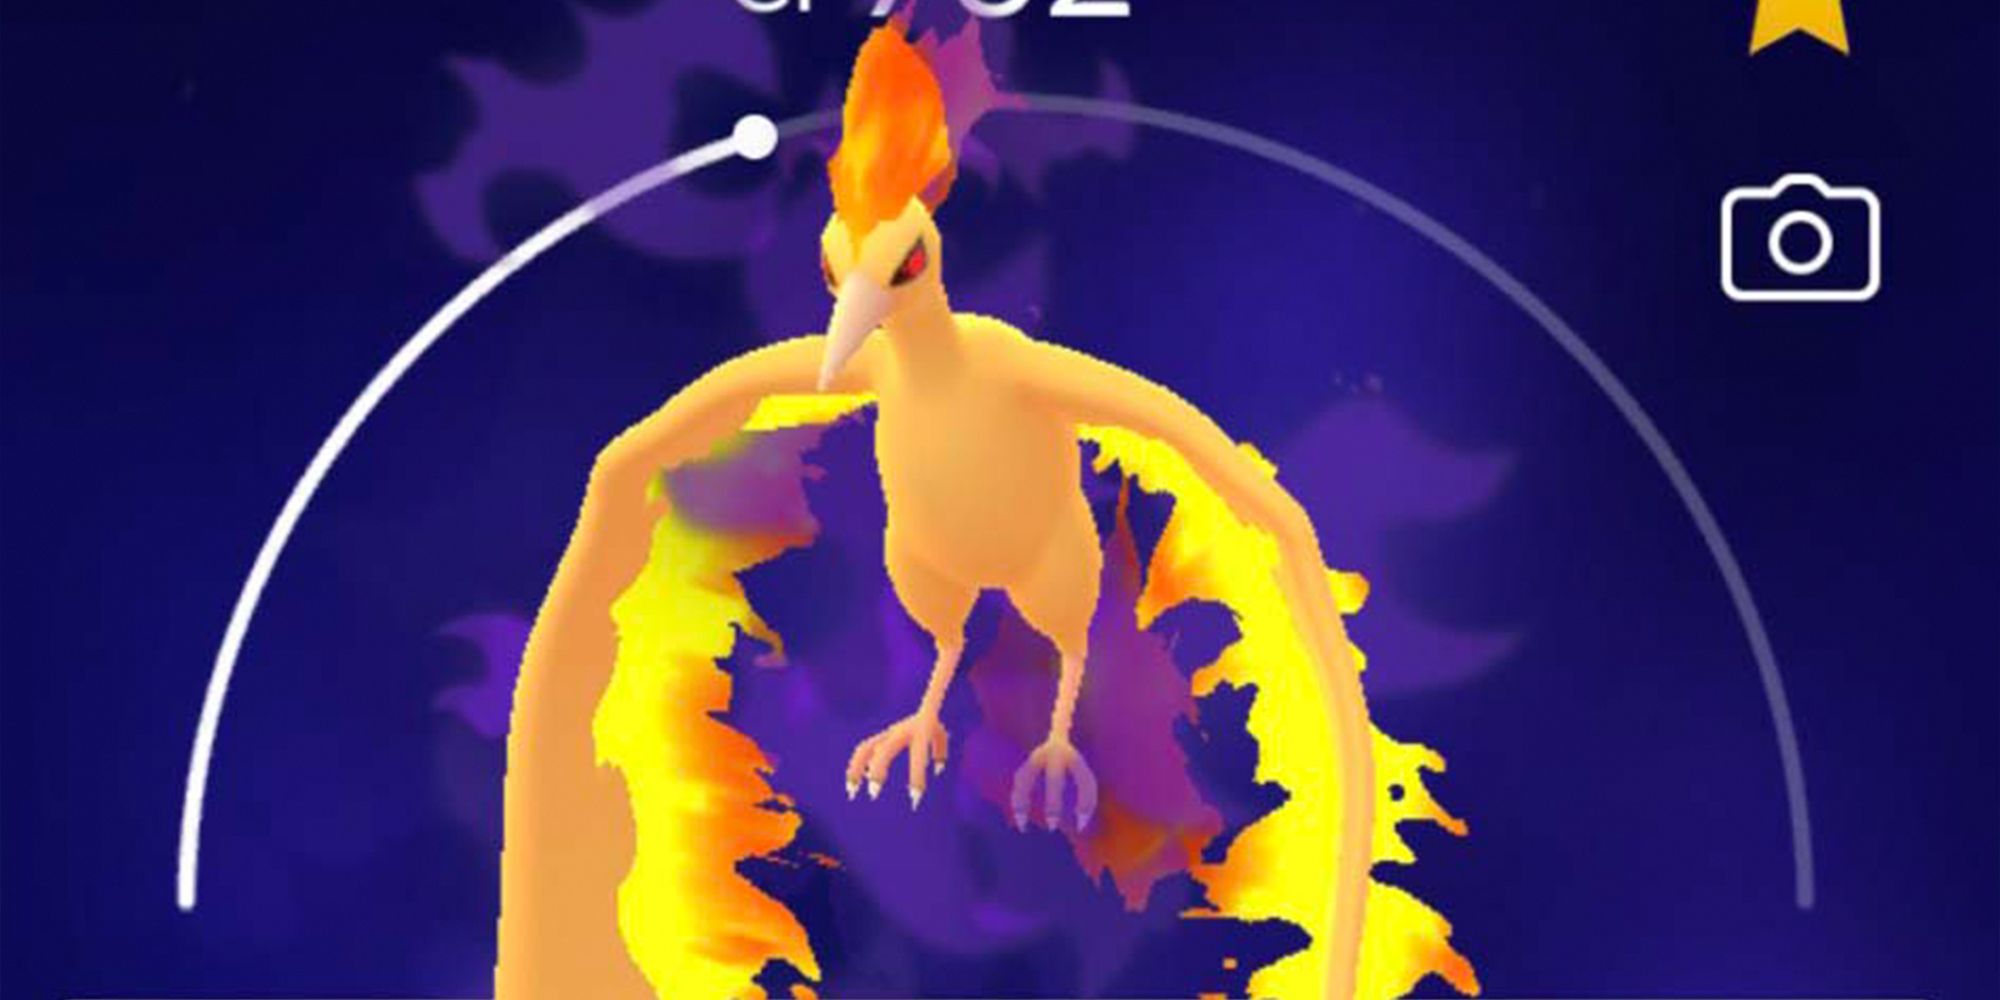 who wants a marshadow you have to give me a shiny moltres not the